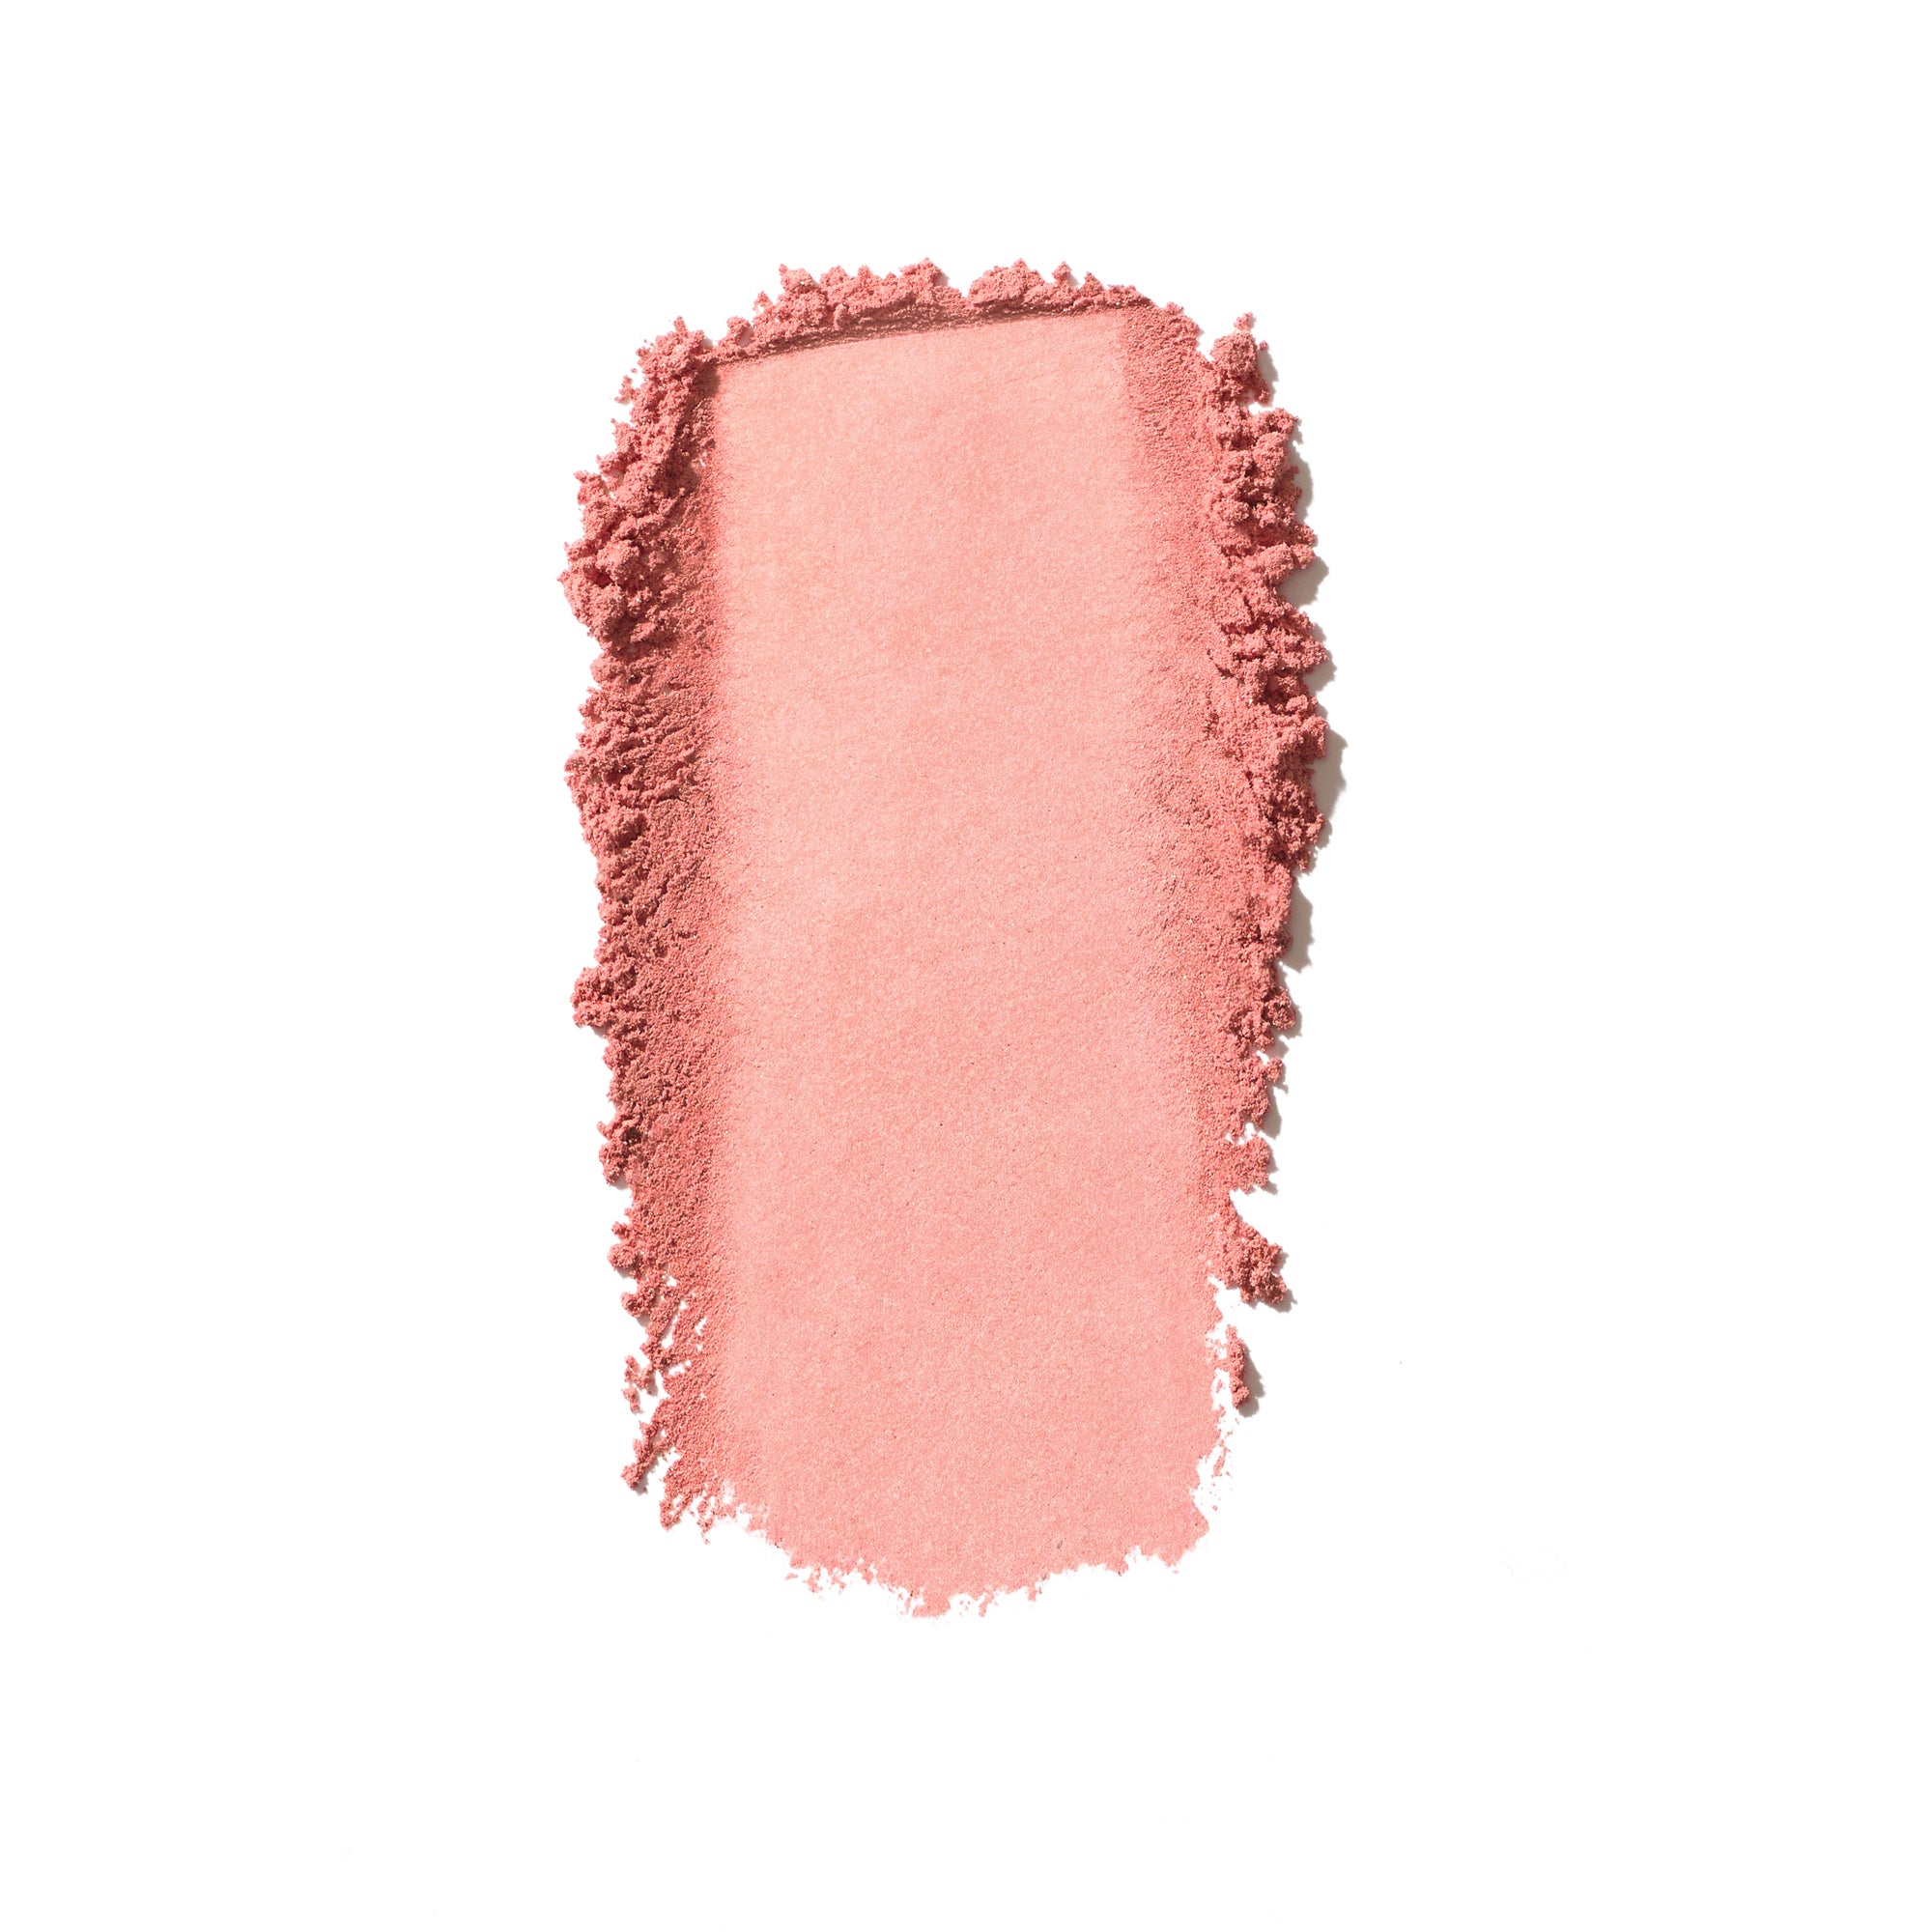 Jane Iredale PurePressed Blush / Clearly Pink